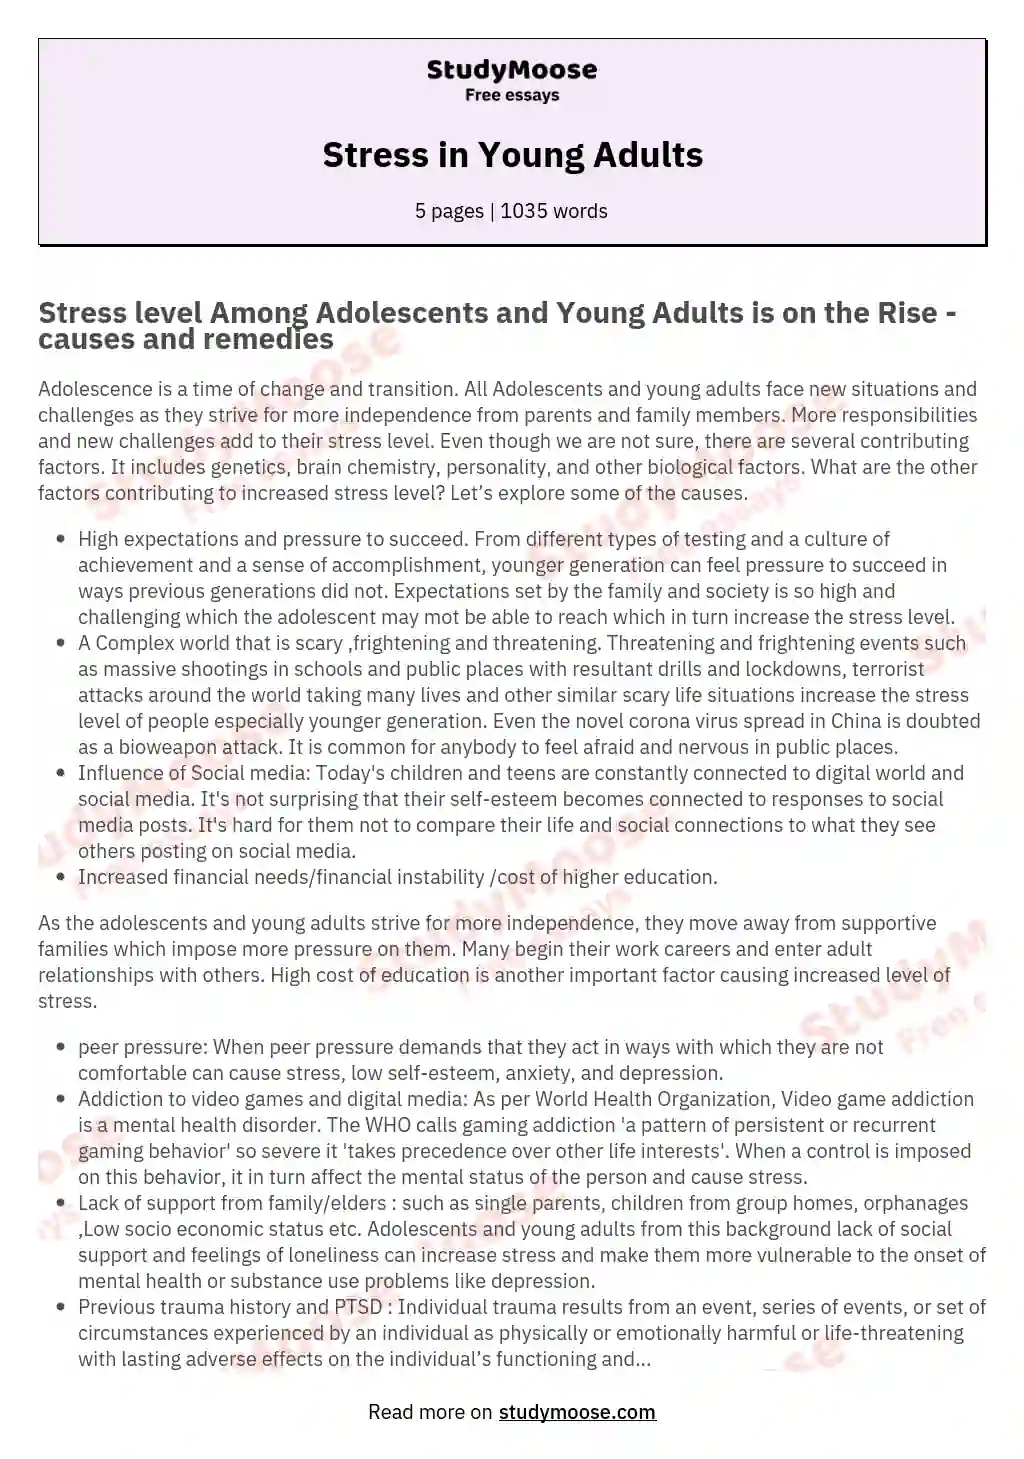 Stress in Young Adults essay